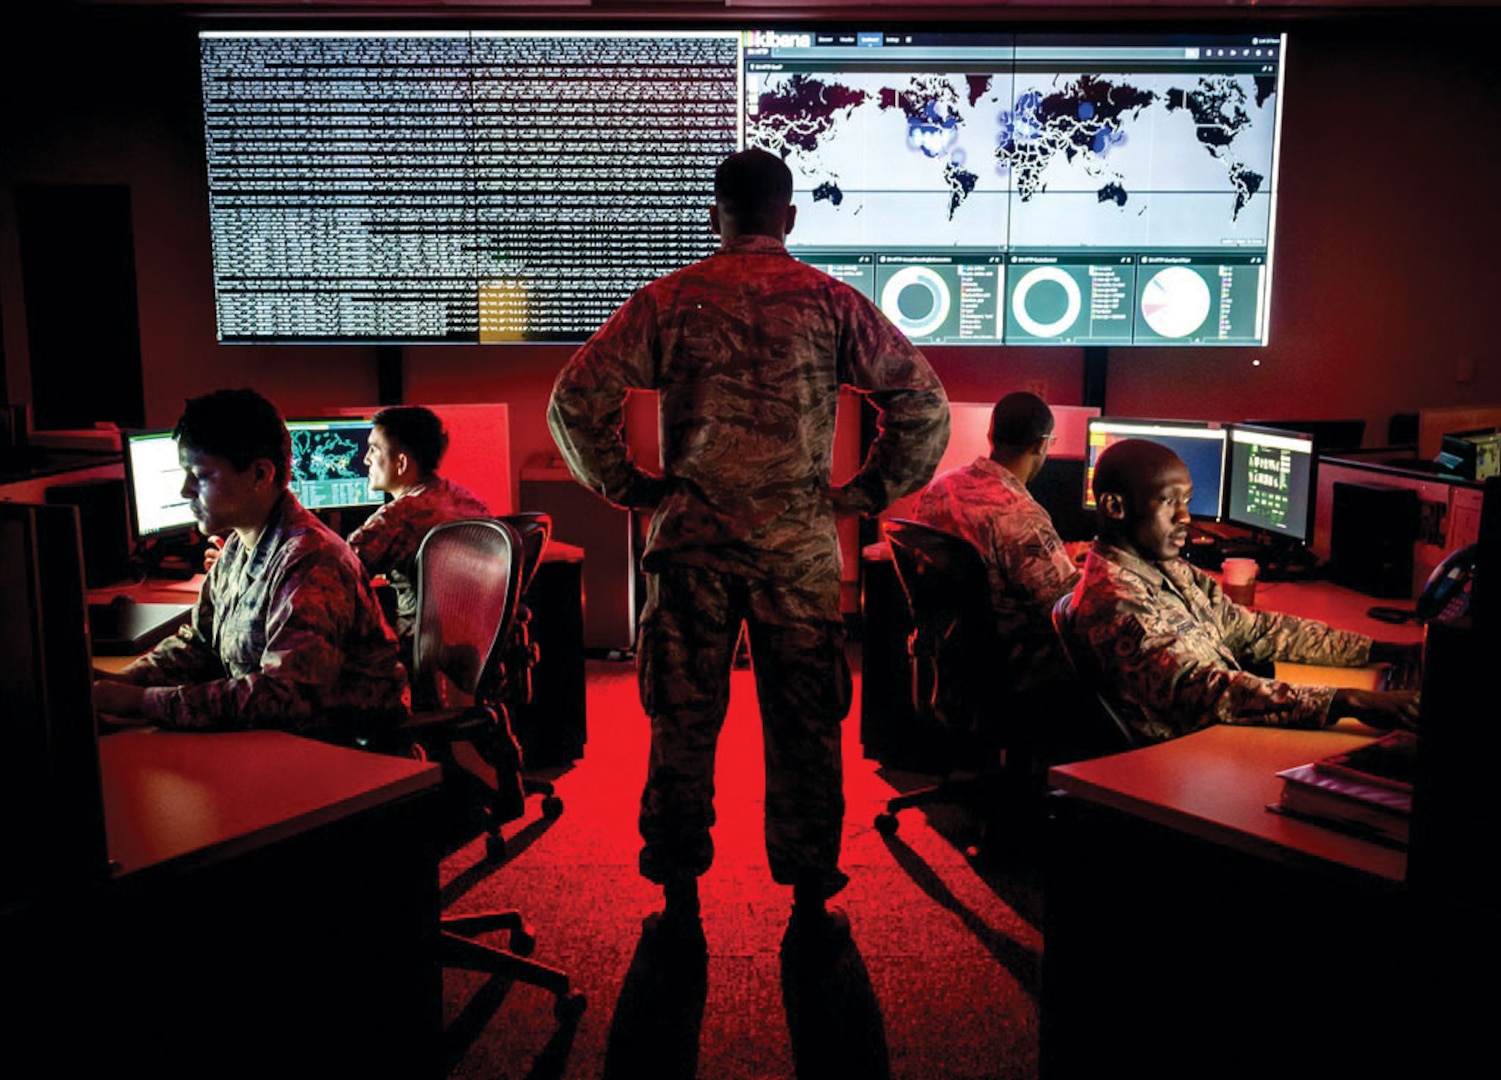 A cyber warfare operations officer reviews visualization data as analysts review log files and provide a cyber threat update.